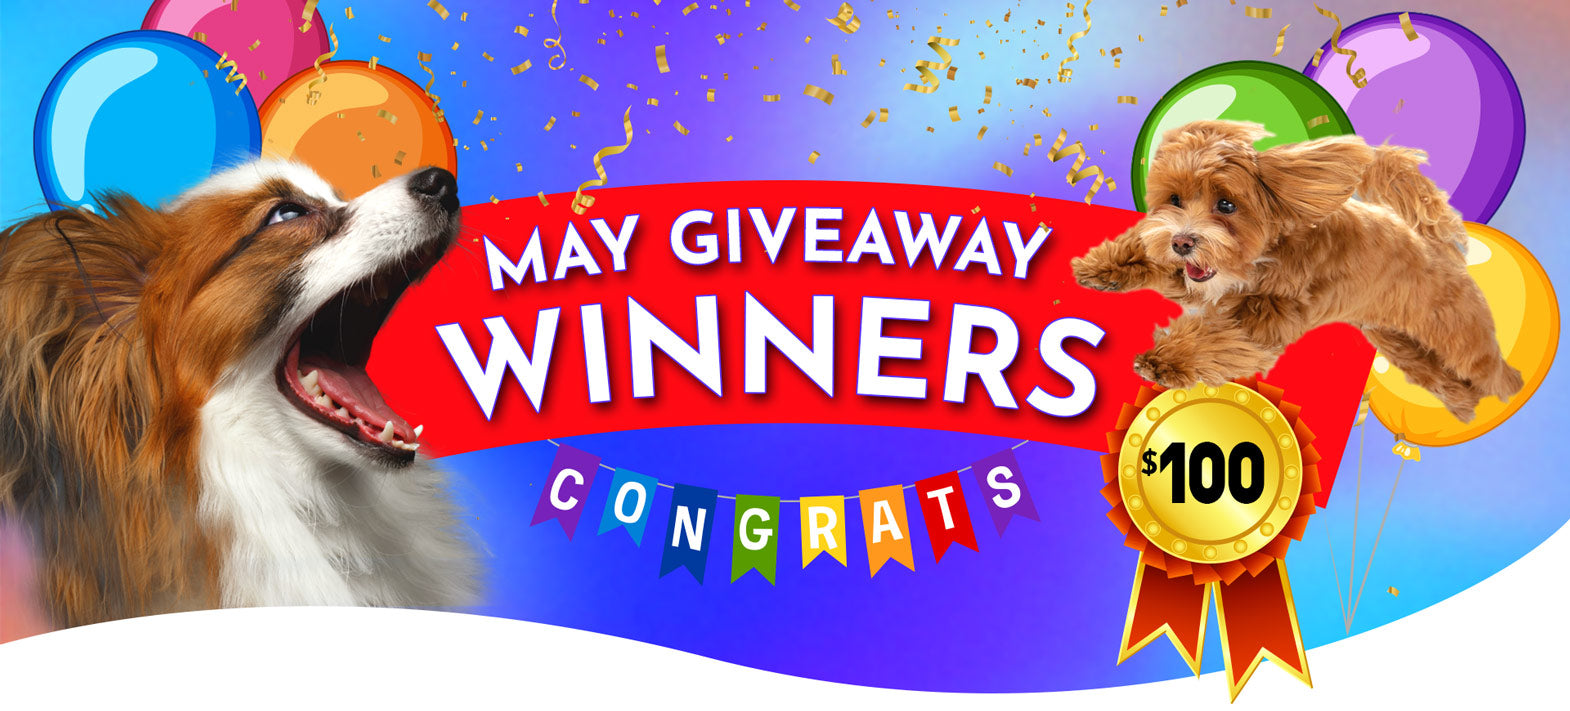 happytails-canine-wellness giveaway contest $100 gift card winners